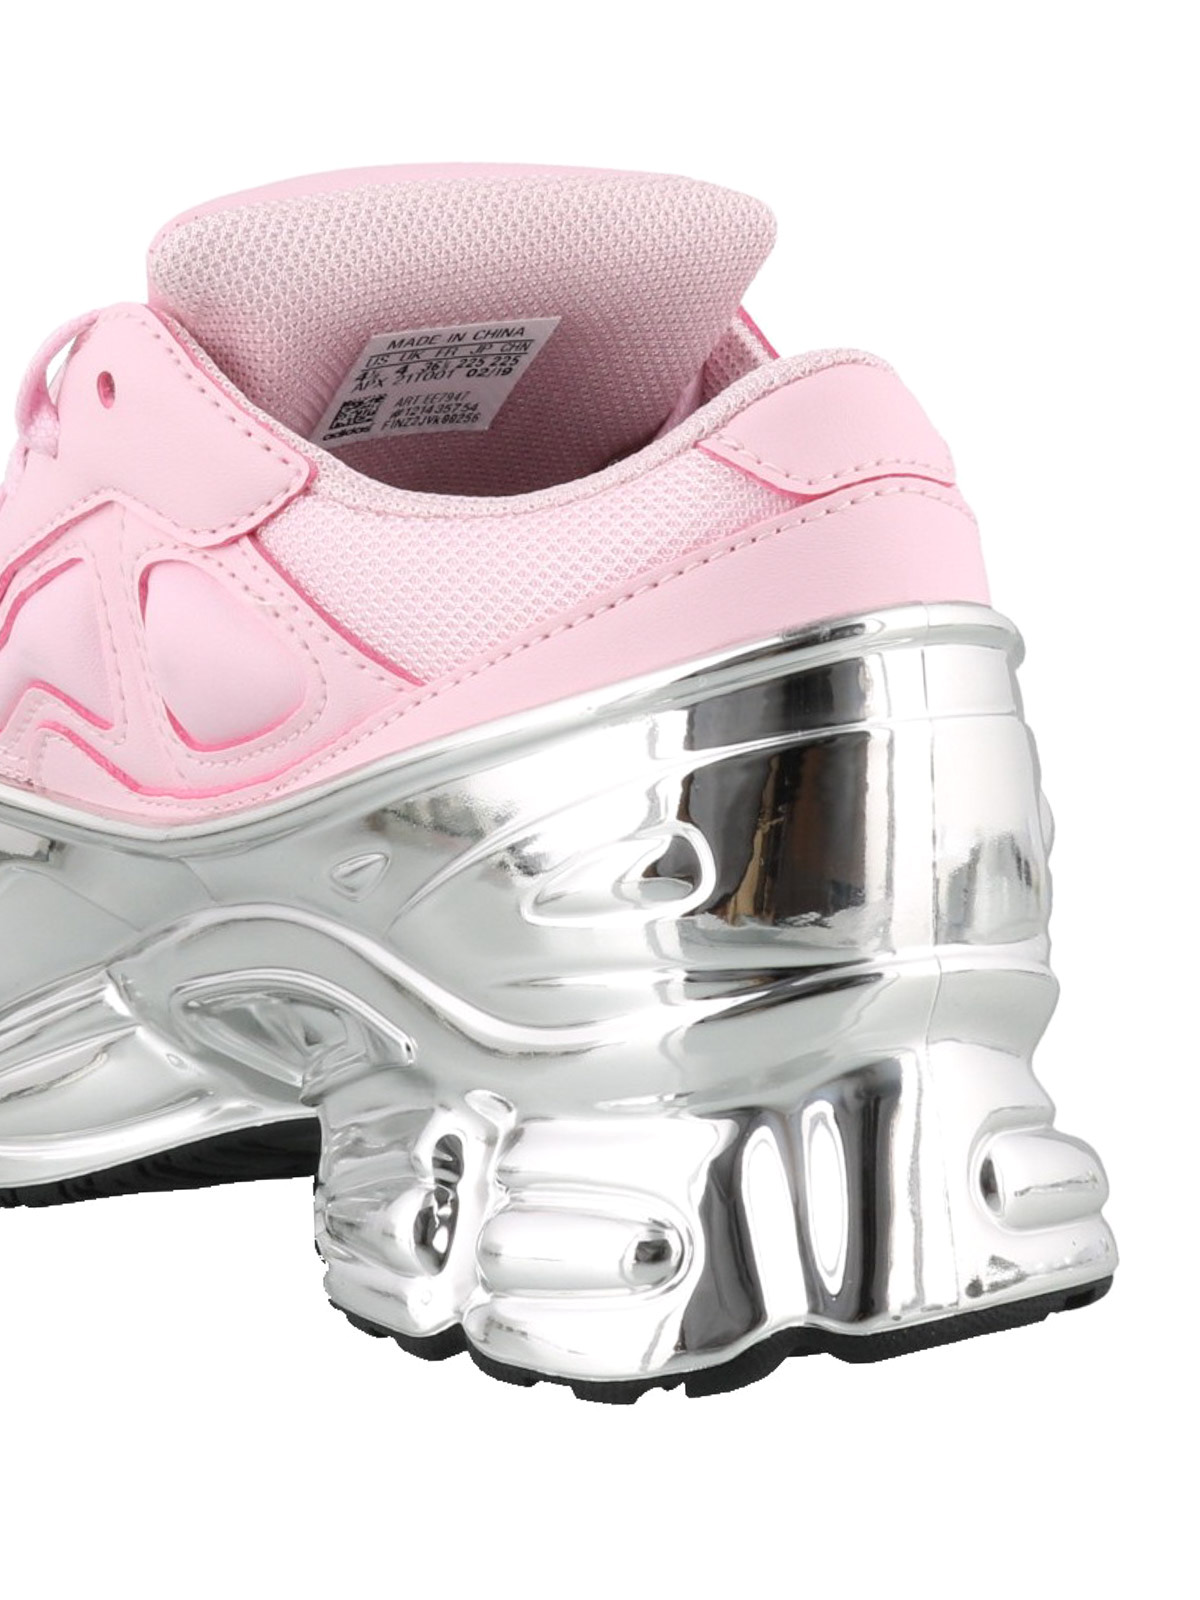 Simons Adidas - Ozweego RS pink and chunky sneakers - EE7947PINKSILVERSILVER